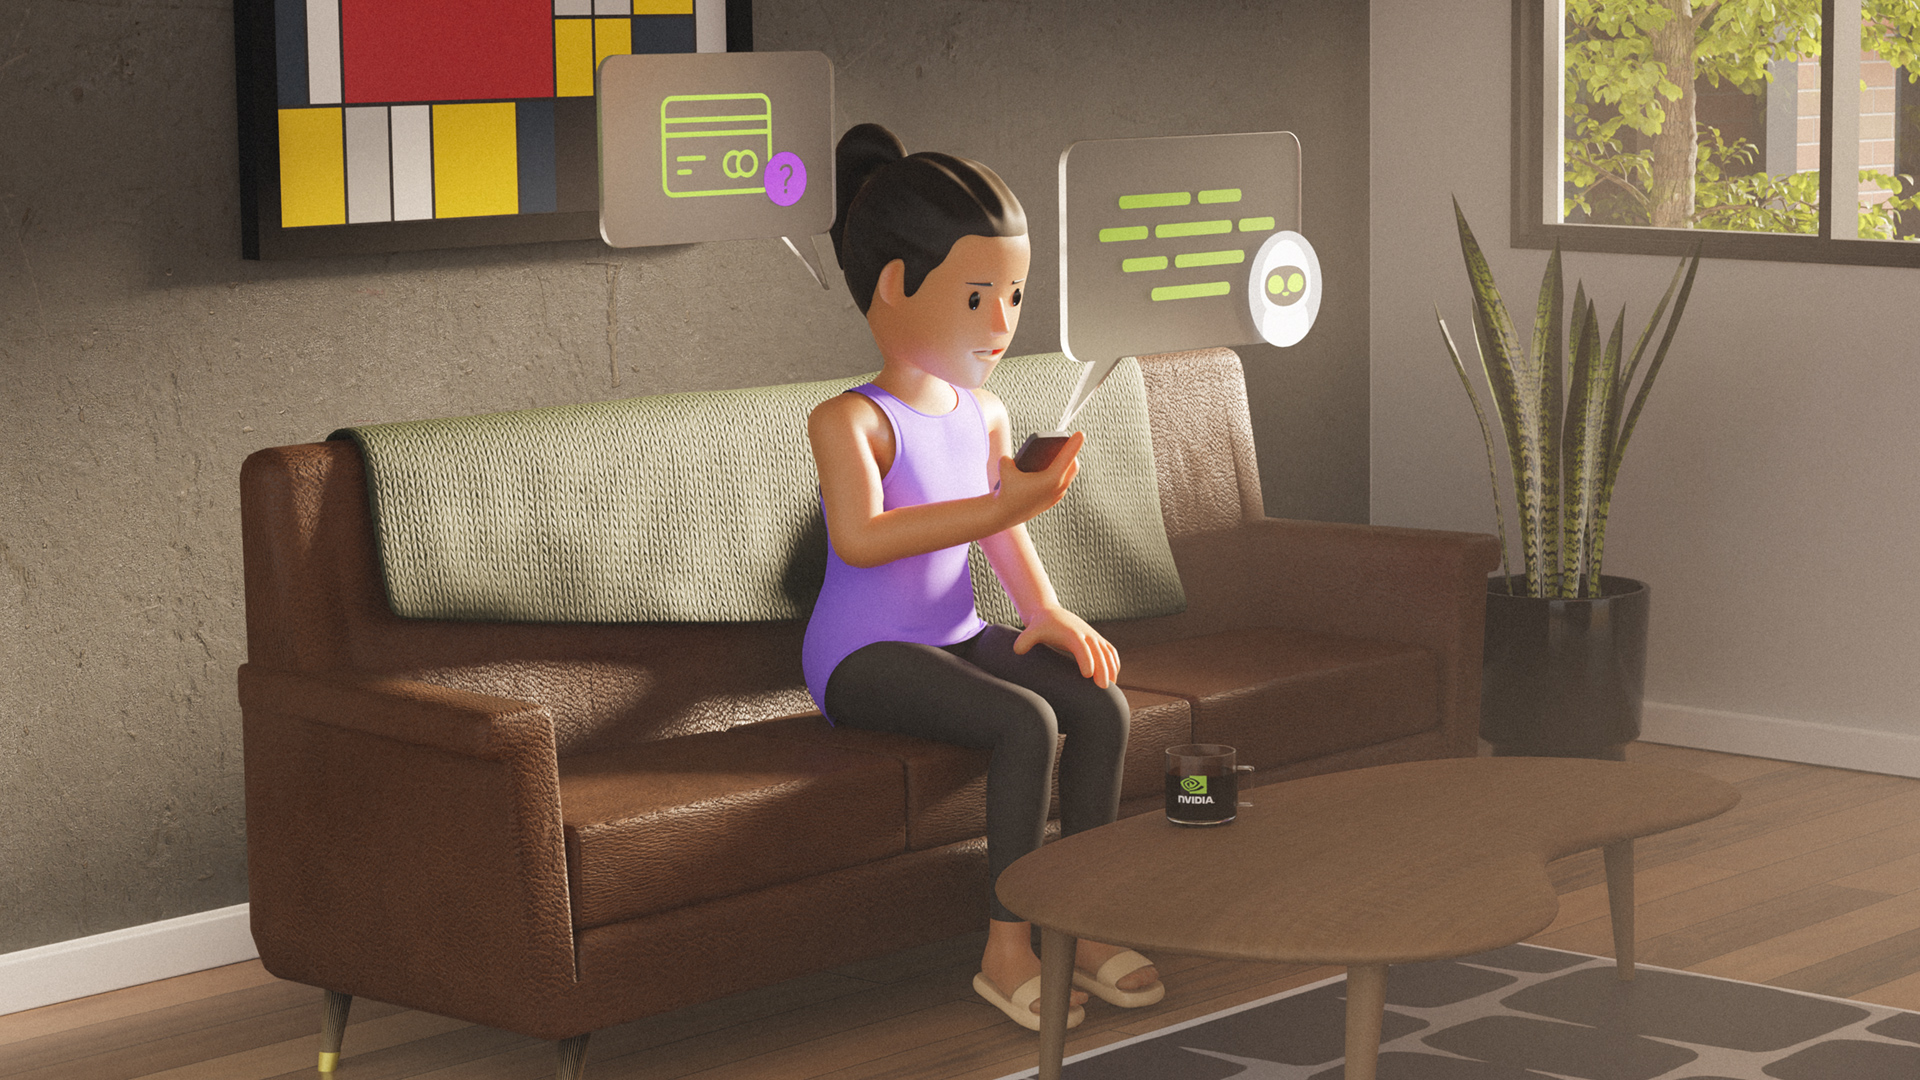 Graphic of a woman sitting on a couch reading her phone with popups.